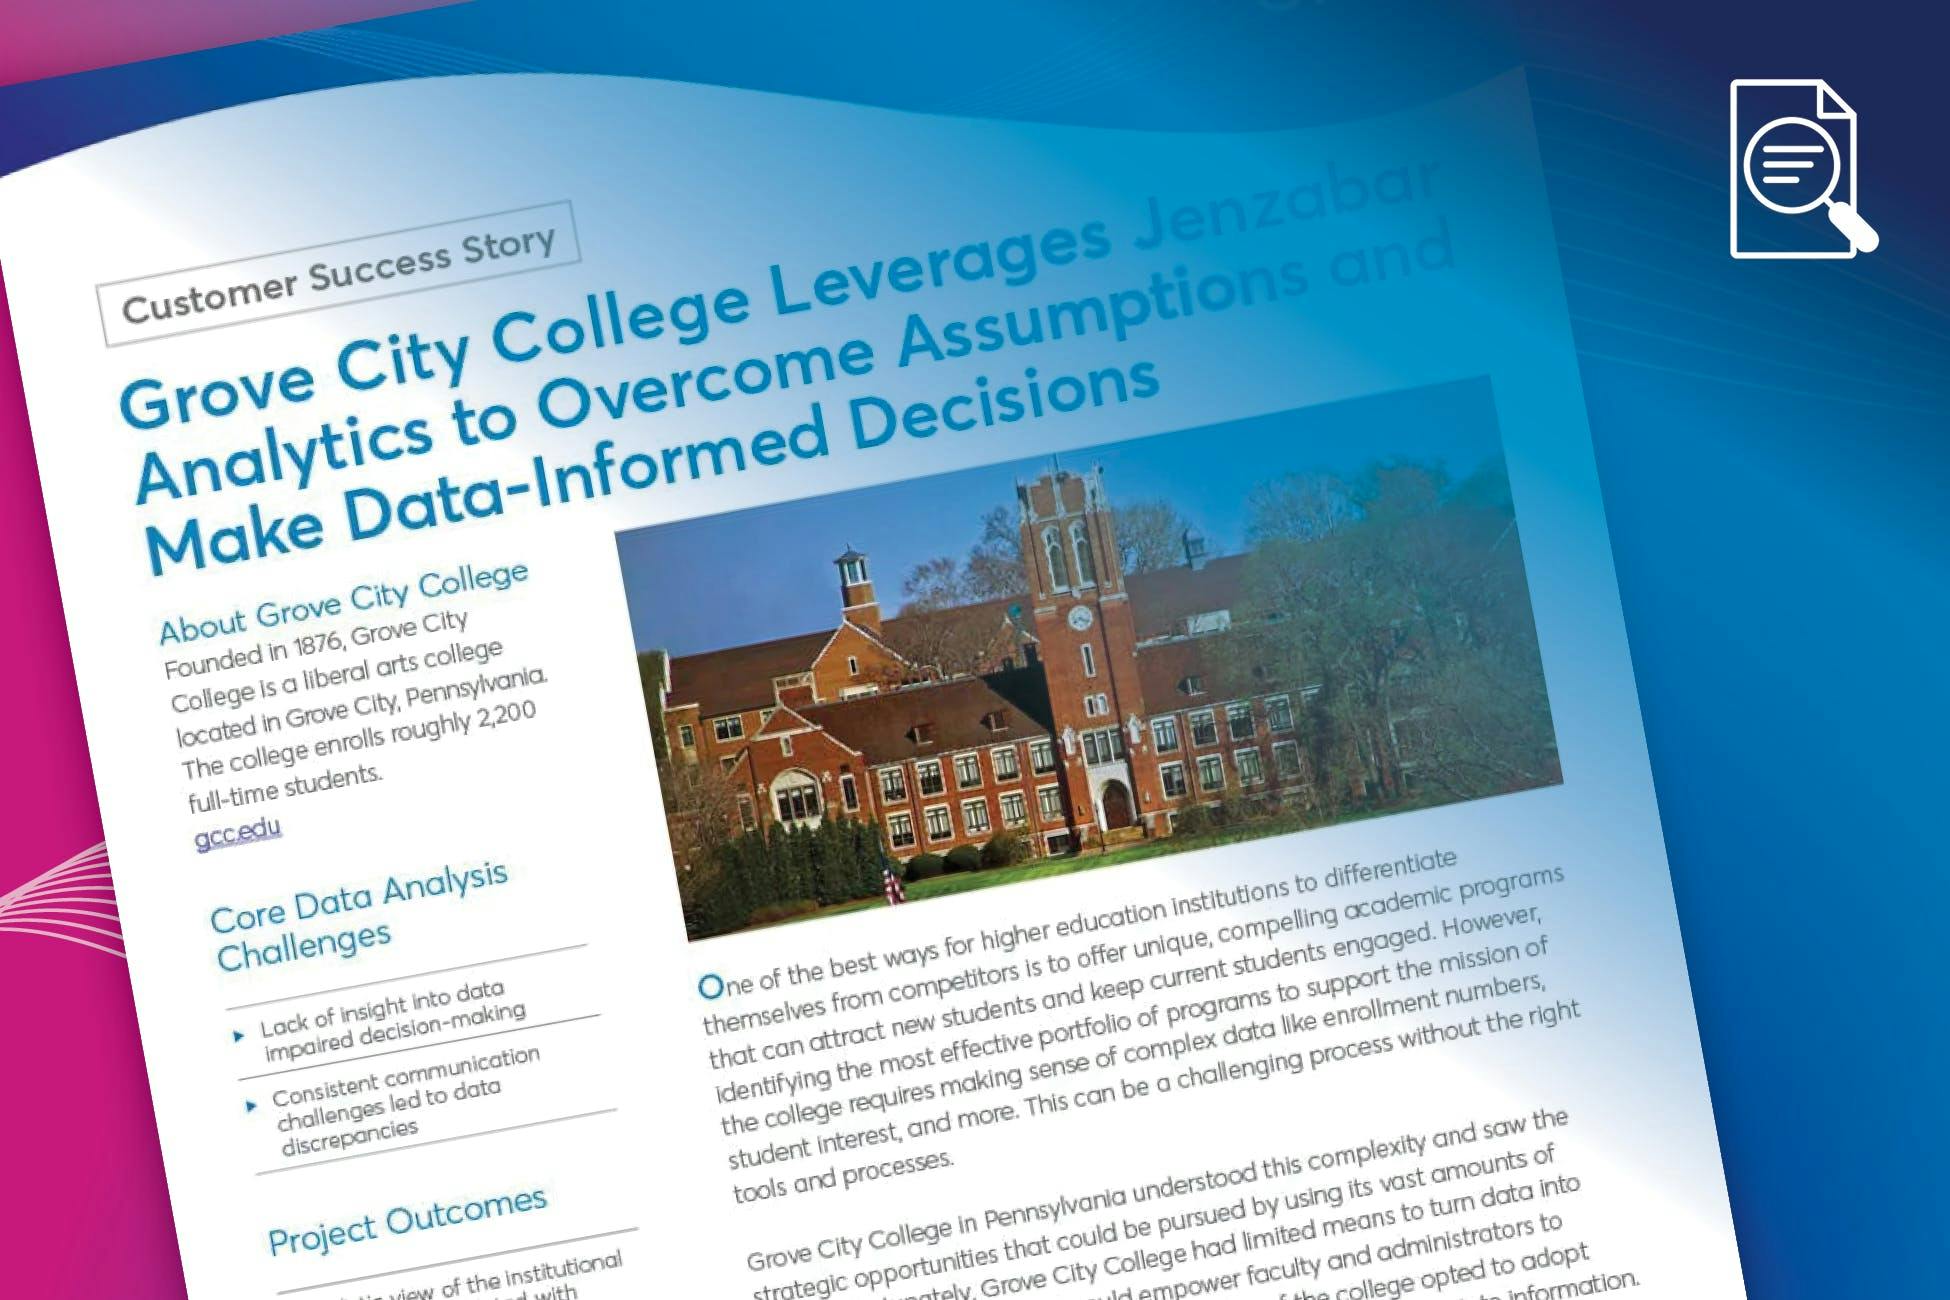 Success Story: Grove City College Leverages Jenzabar Analytics to Overcome Assumptions and Make Data-Informed Decisions